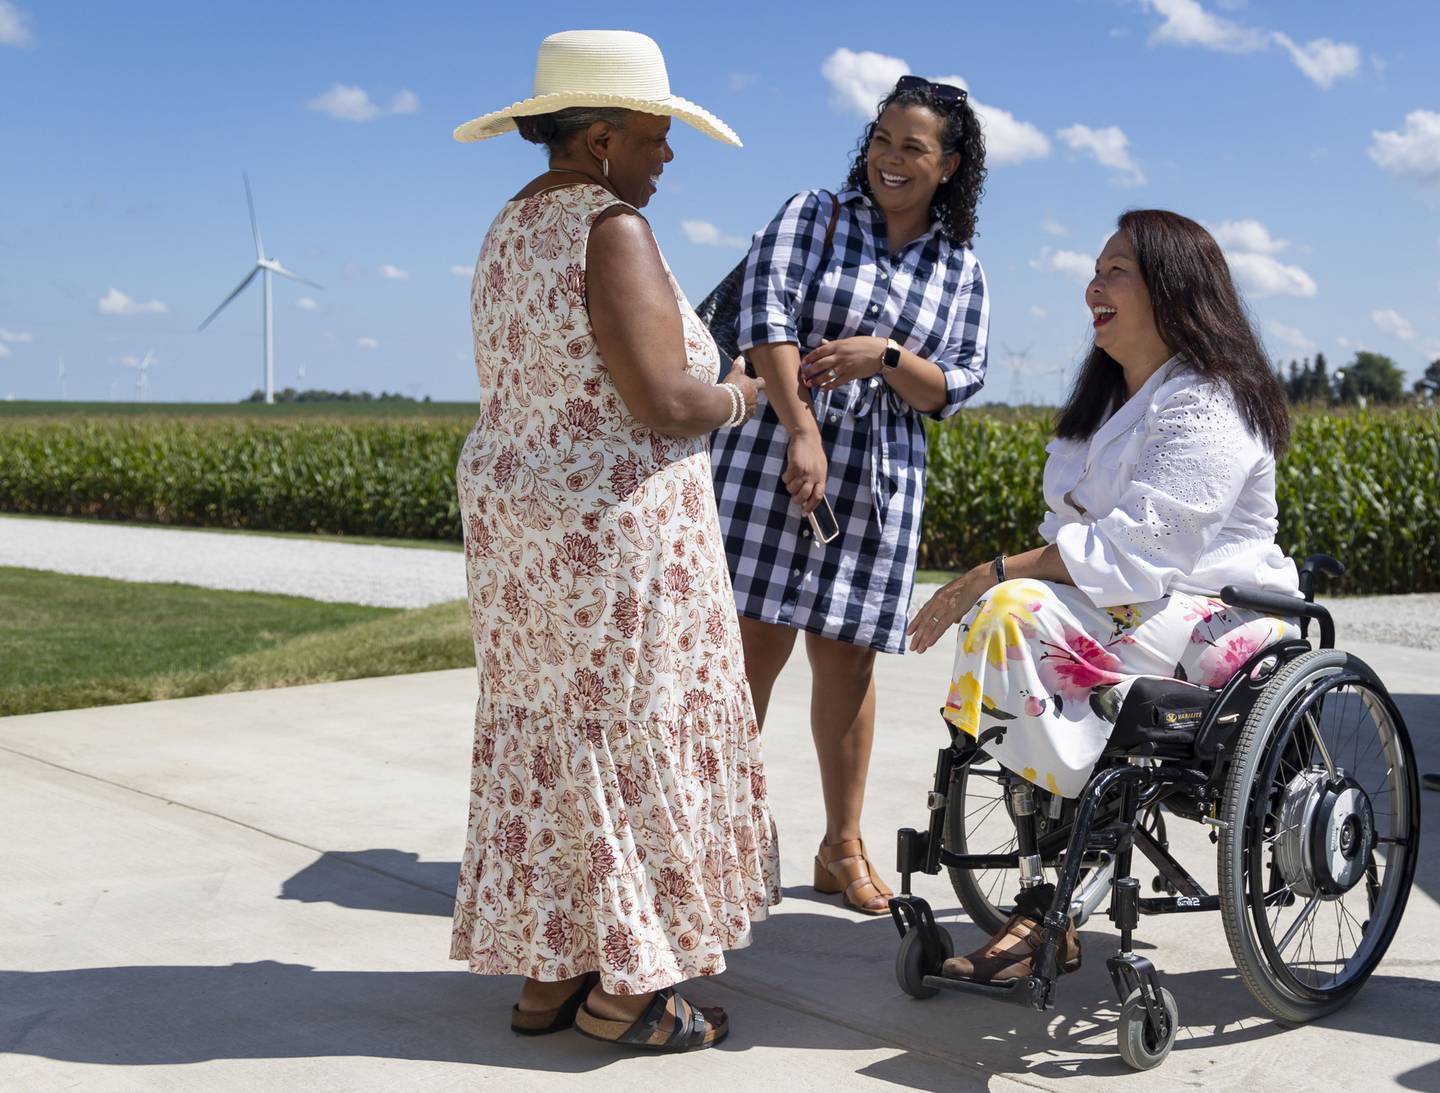 U.S. Sen. Tammy Duckworth greets people after speaking, Aug. 24, 2022, at Schuler Farms in downstate Lexington during the Illinois Agricultural Legislative Roundtable. 